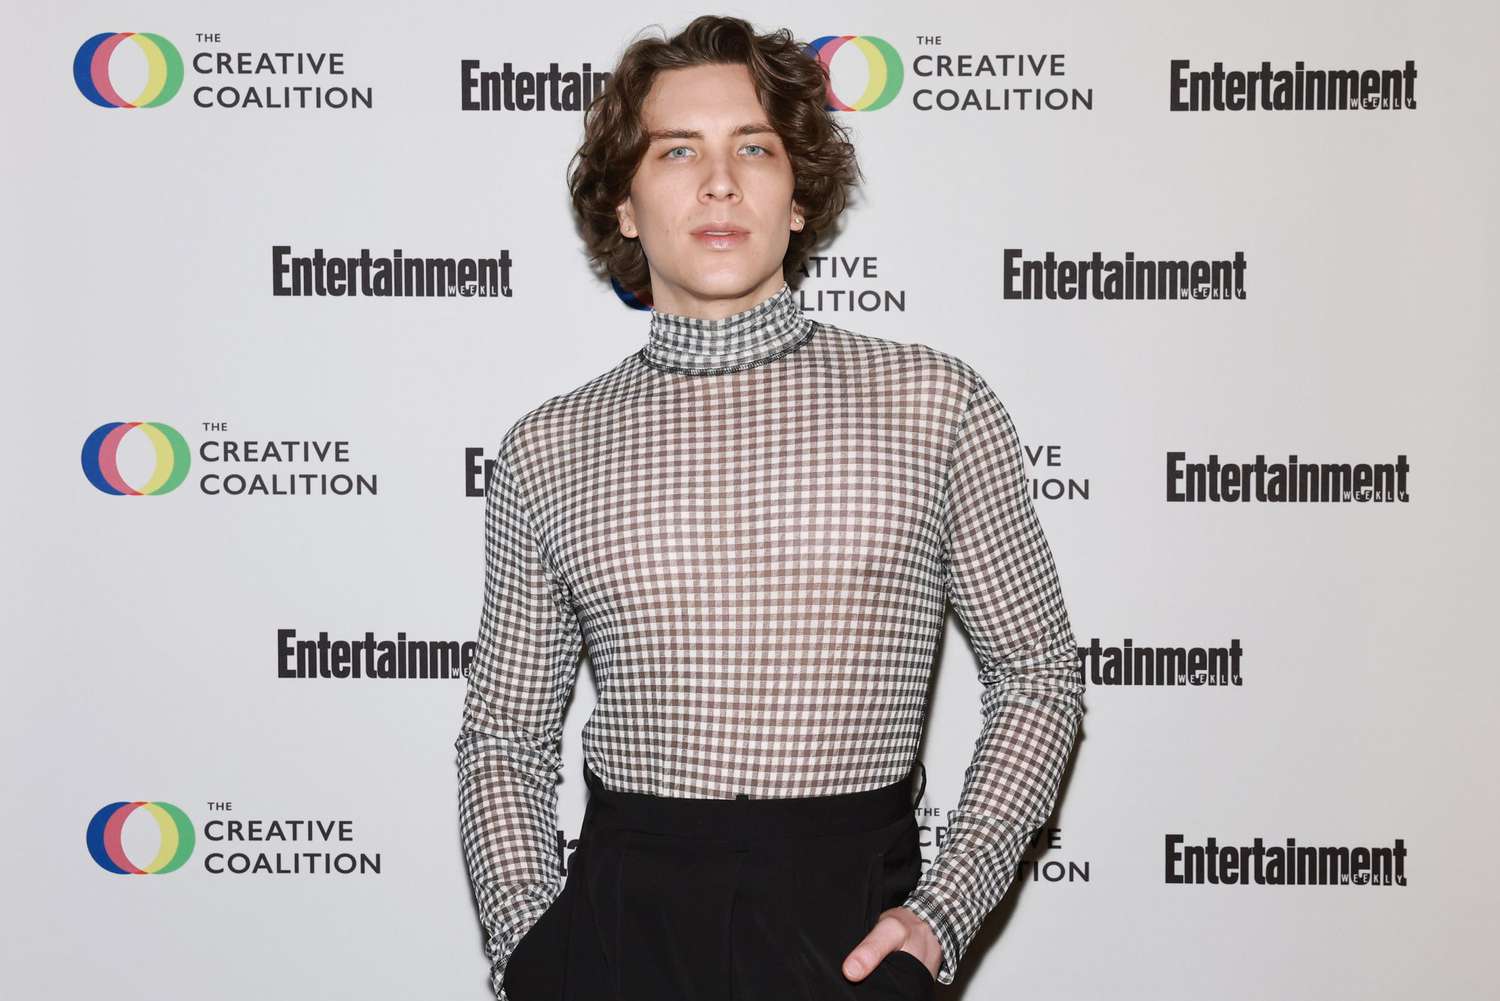 PARK CITY, UTAH - JANUARY 21: Cody Fern attends the 2023 Spotlight Initiative Awards Dinner Gala Hosted By Tim Daly Benefiting The Creative Coalition at Buona Vita on January 21, 2023 in Park City, Utah. (Photo by Arturo Holmes/Getty Images)